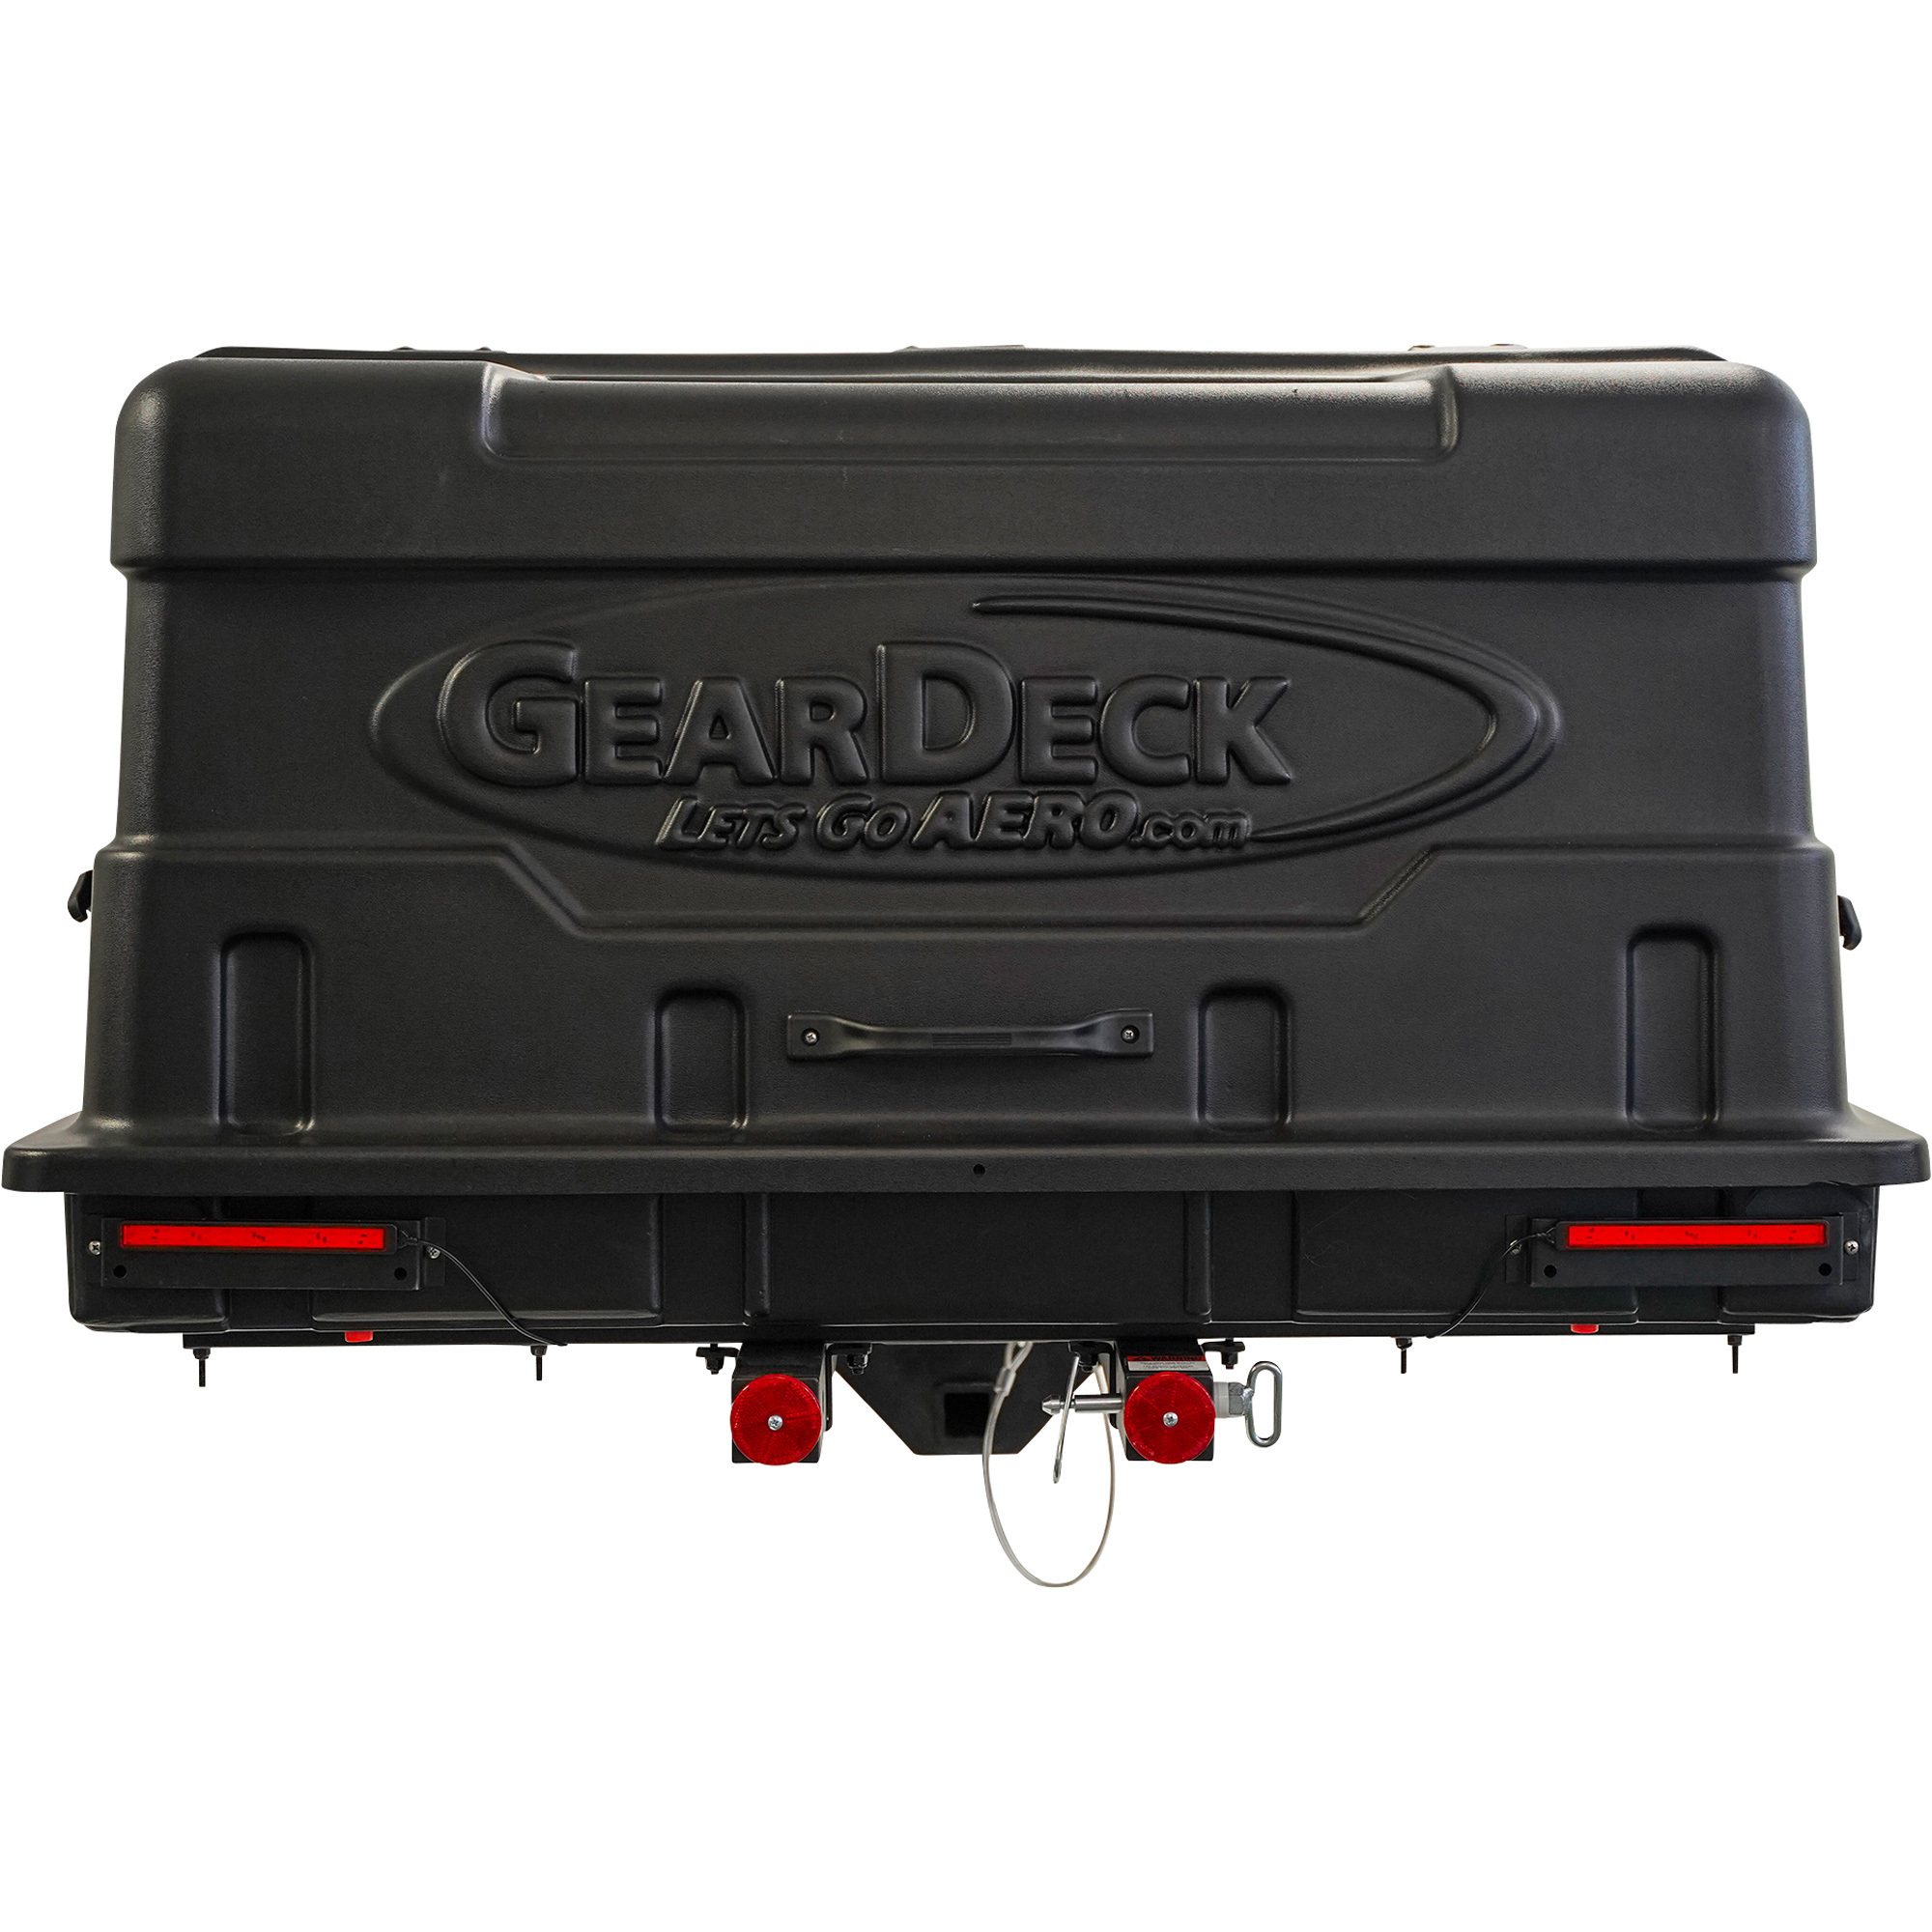 Let's Go Aero GearDeck Slideout Enclosed Poly Hitch Cargo Carrier, With LED Lights, 420-Lb. Capacity, Black, 48Inch x 25Inch x 27Inch, Model H00604